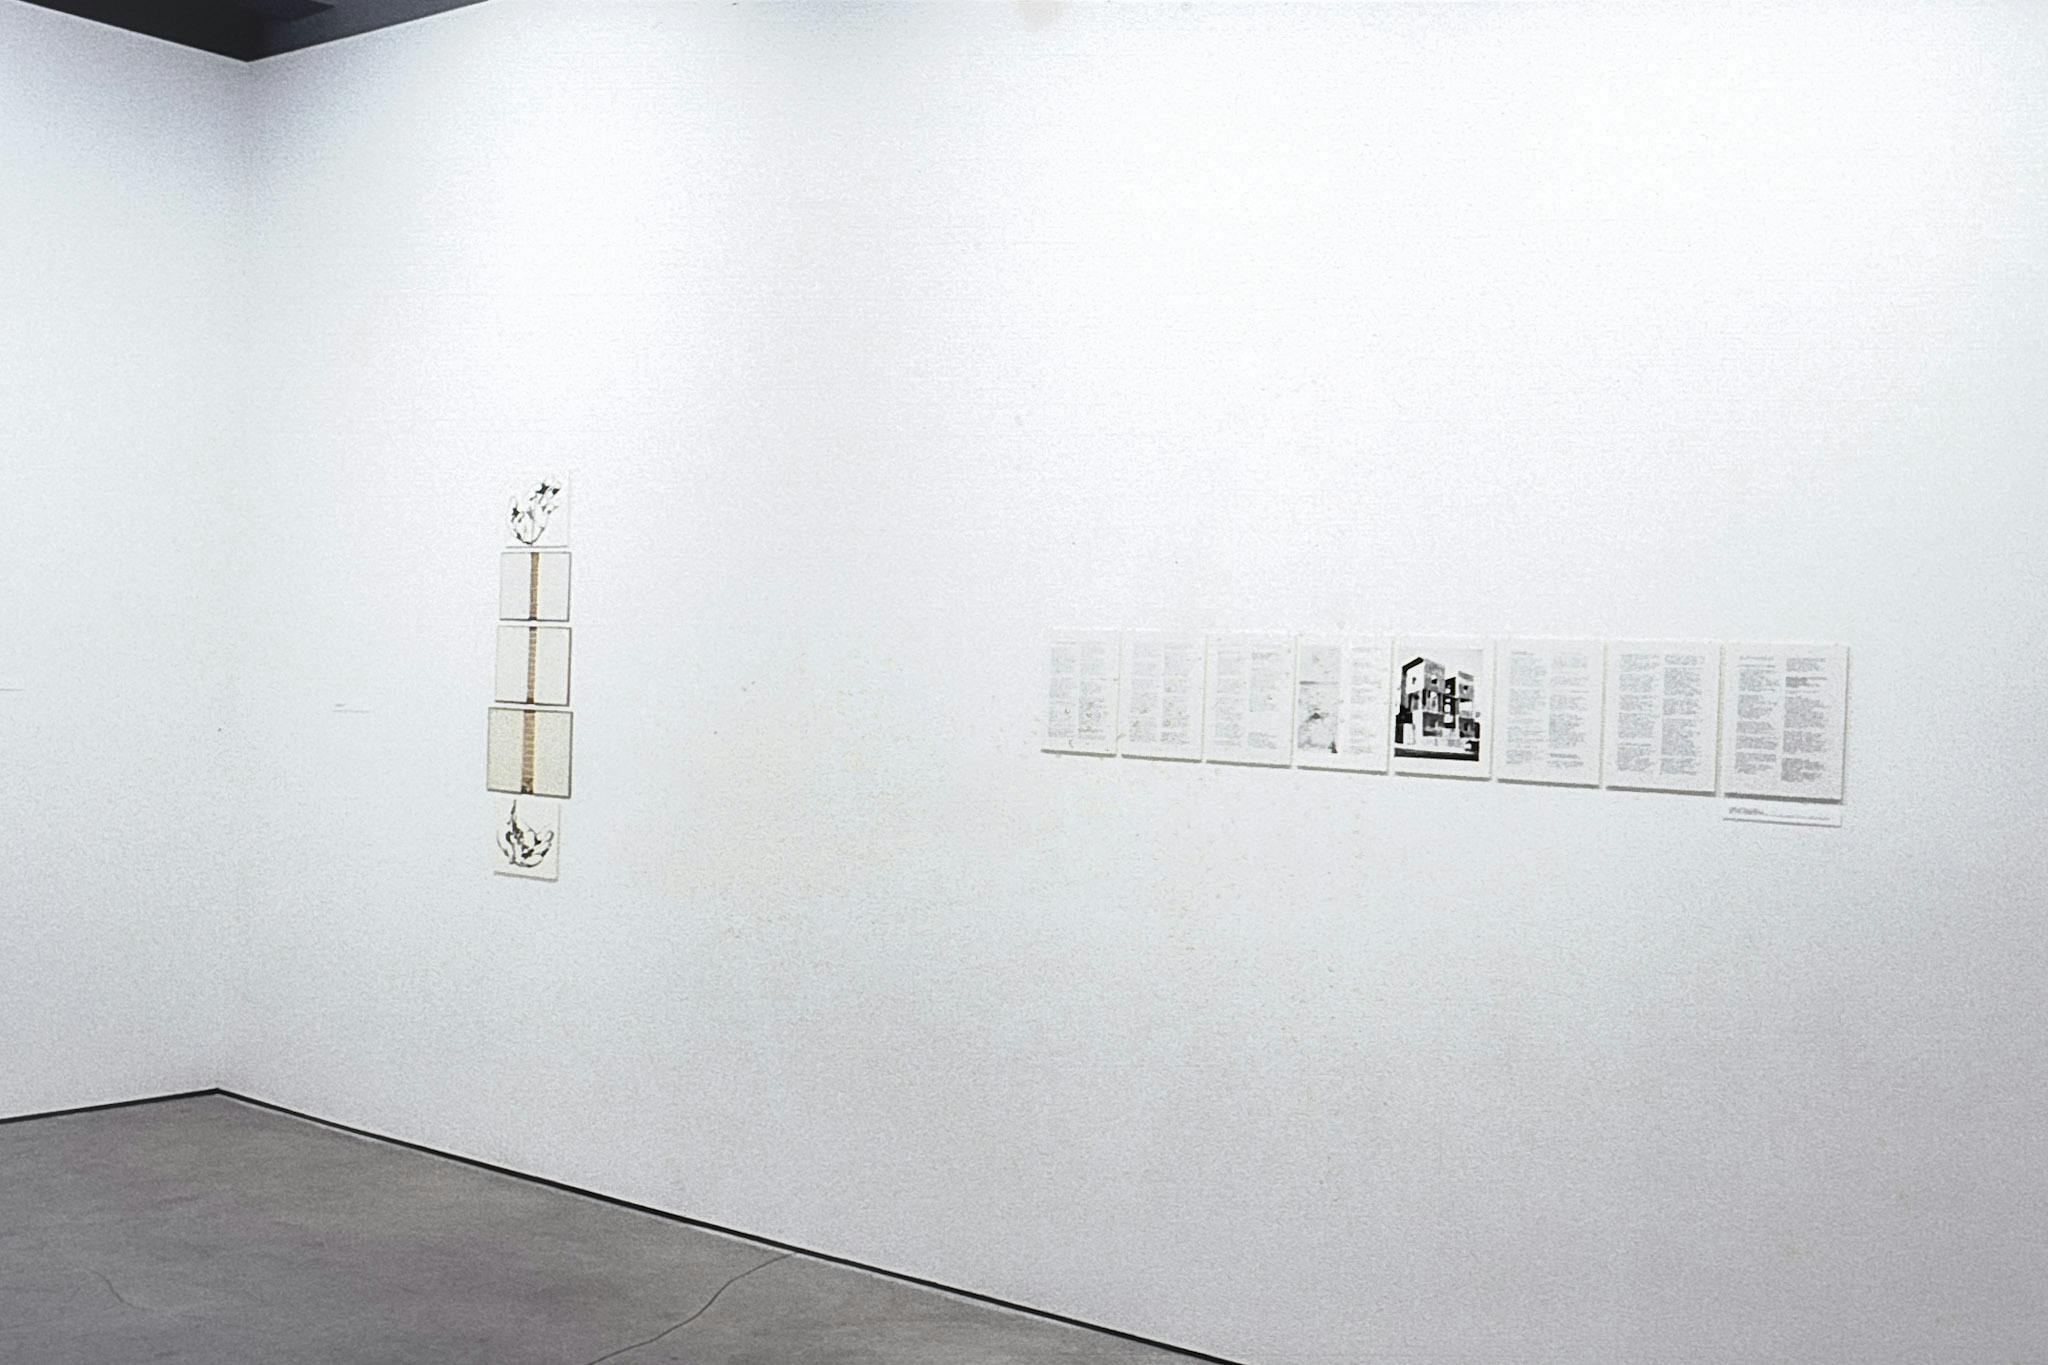 A closeup of a gallery wall with 2 artworks mounted on it. One shows 3 photos of a tall structure between two drawings of hands. The other is 7 panels of text with a photo of a building in the middle.